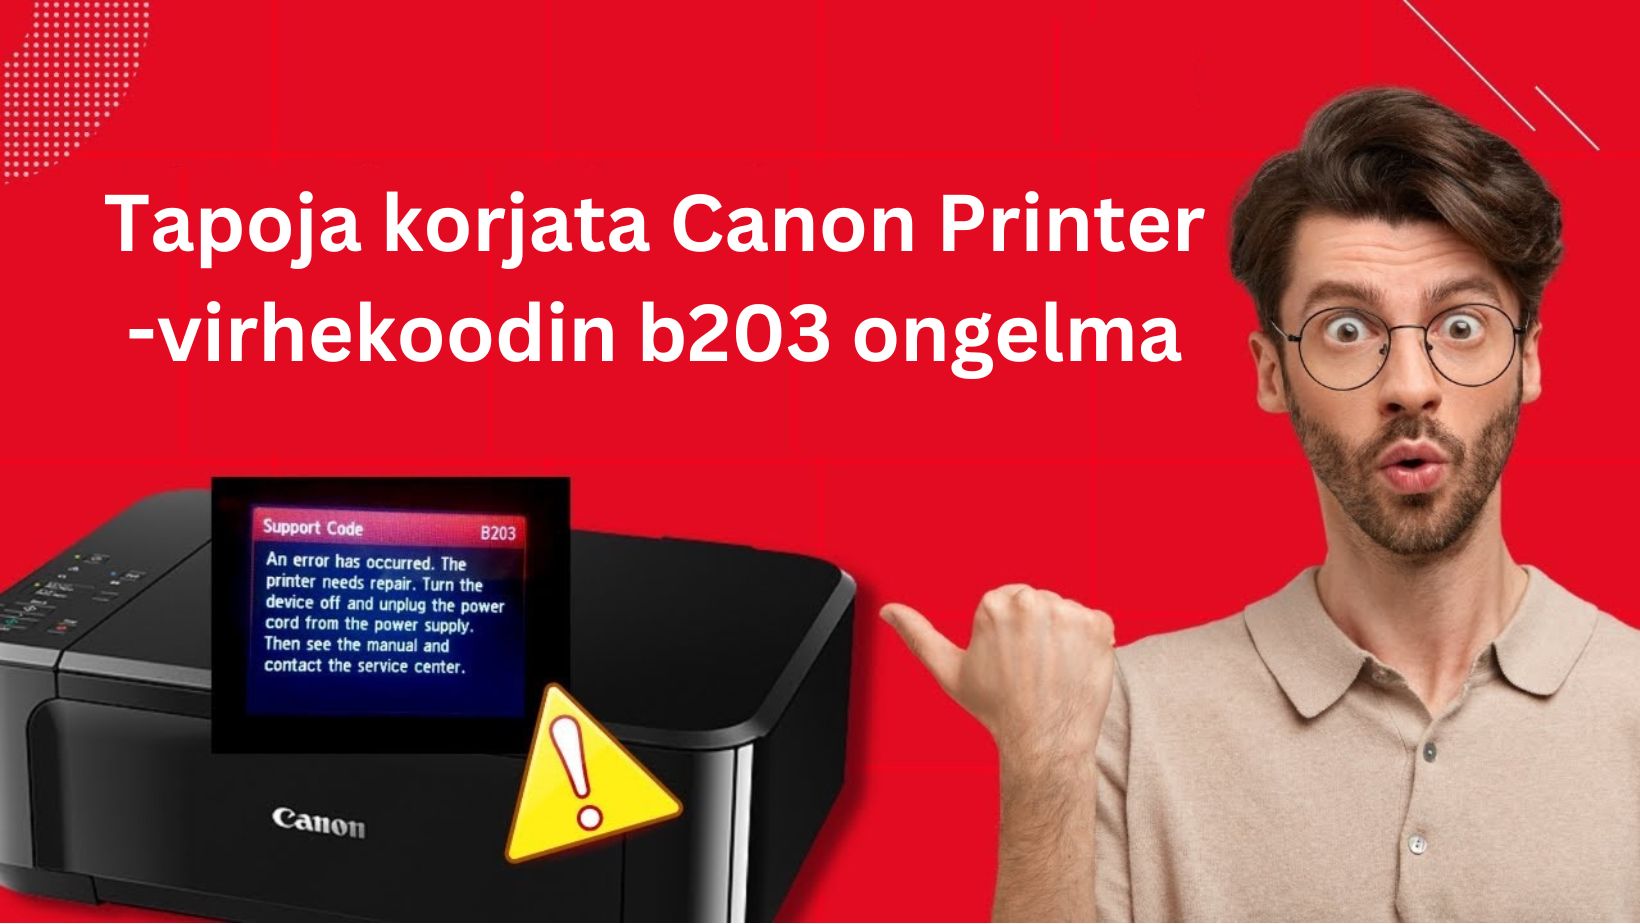 Canon asiakastuki Suomi,Finland,Services,Other Services,77traders